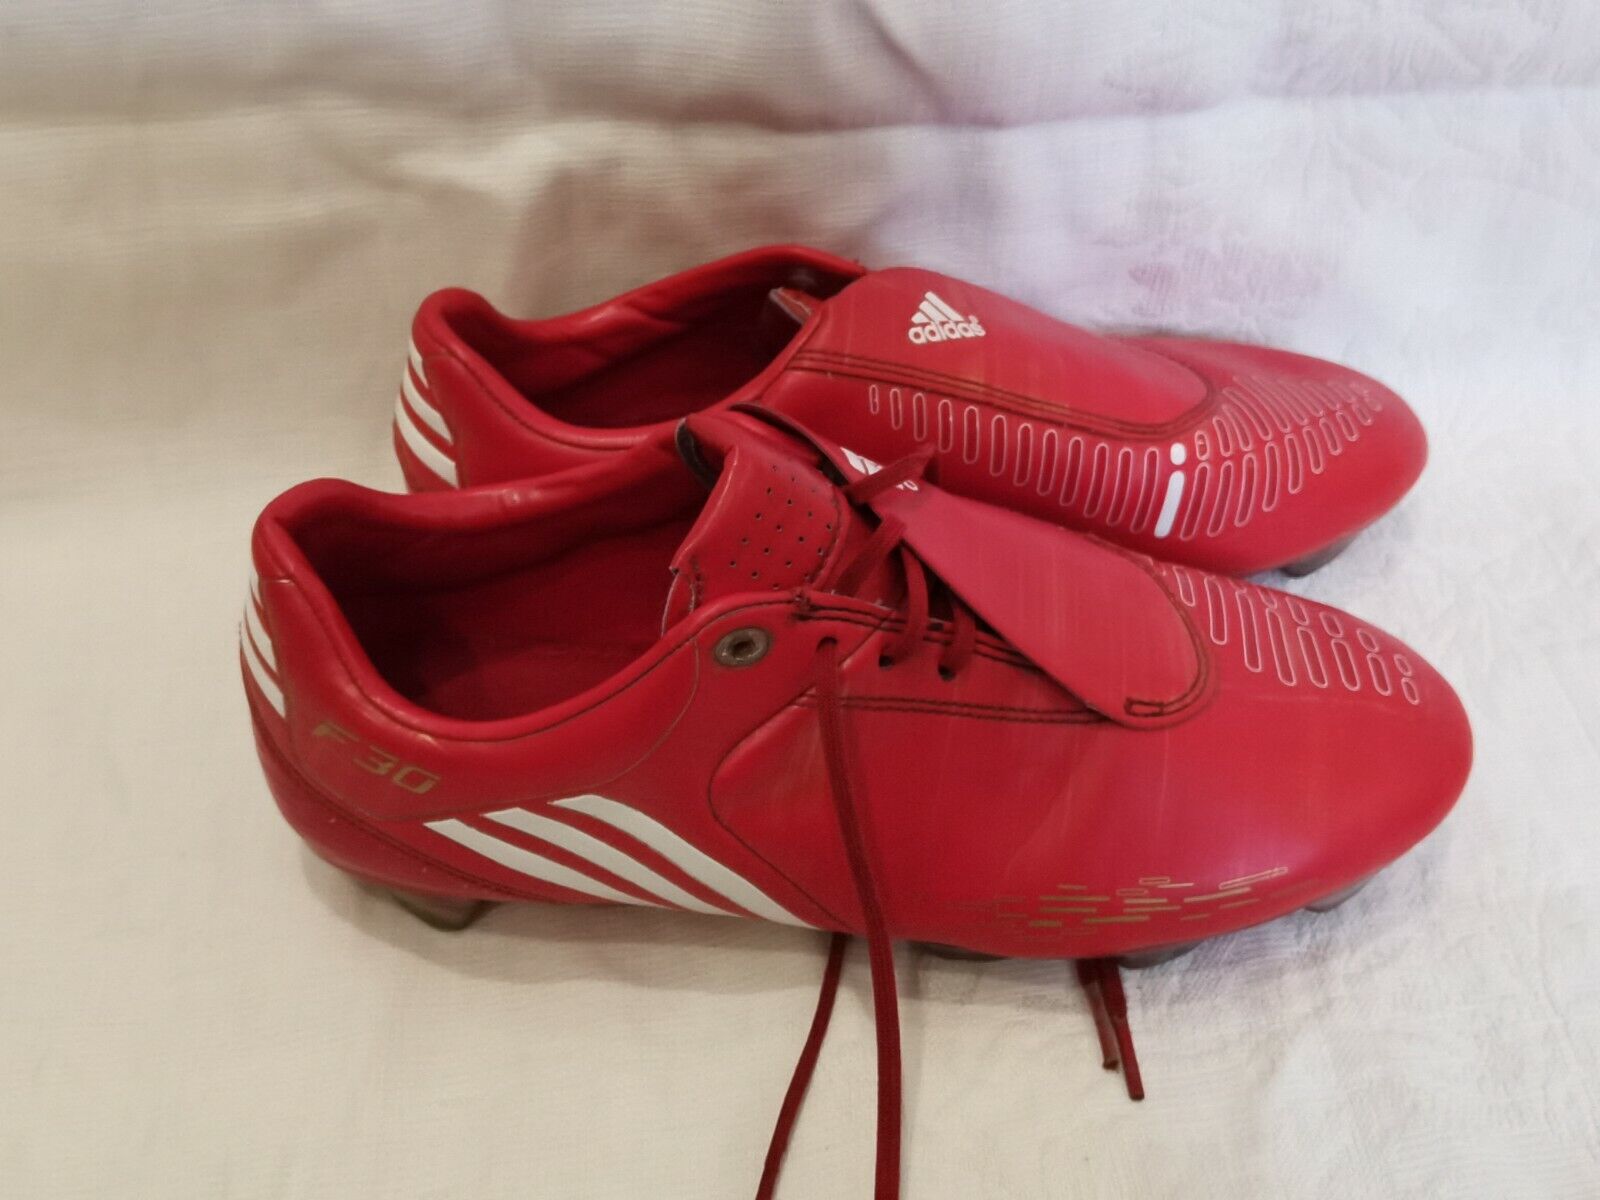 ADIDAS F30 TRX SG 2009 red G 15507 SOCCER CLEATS FOOTBALL BOOTS US 7.5